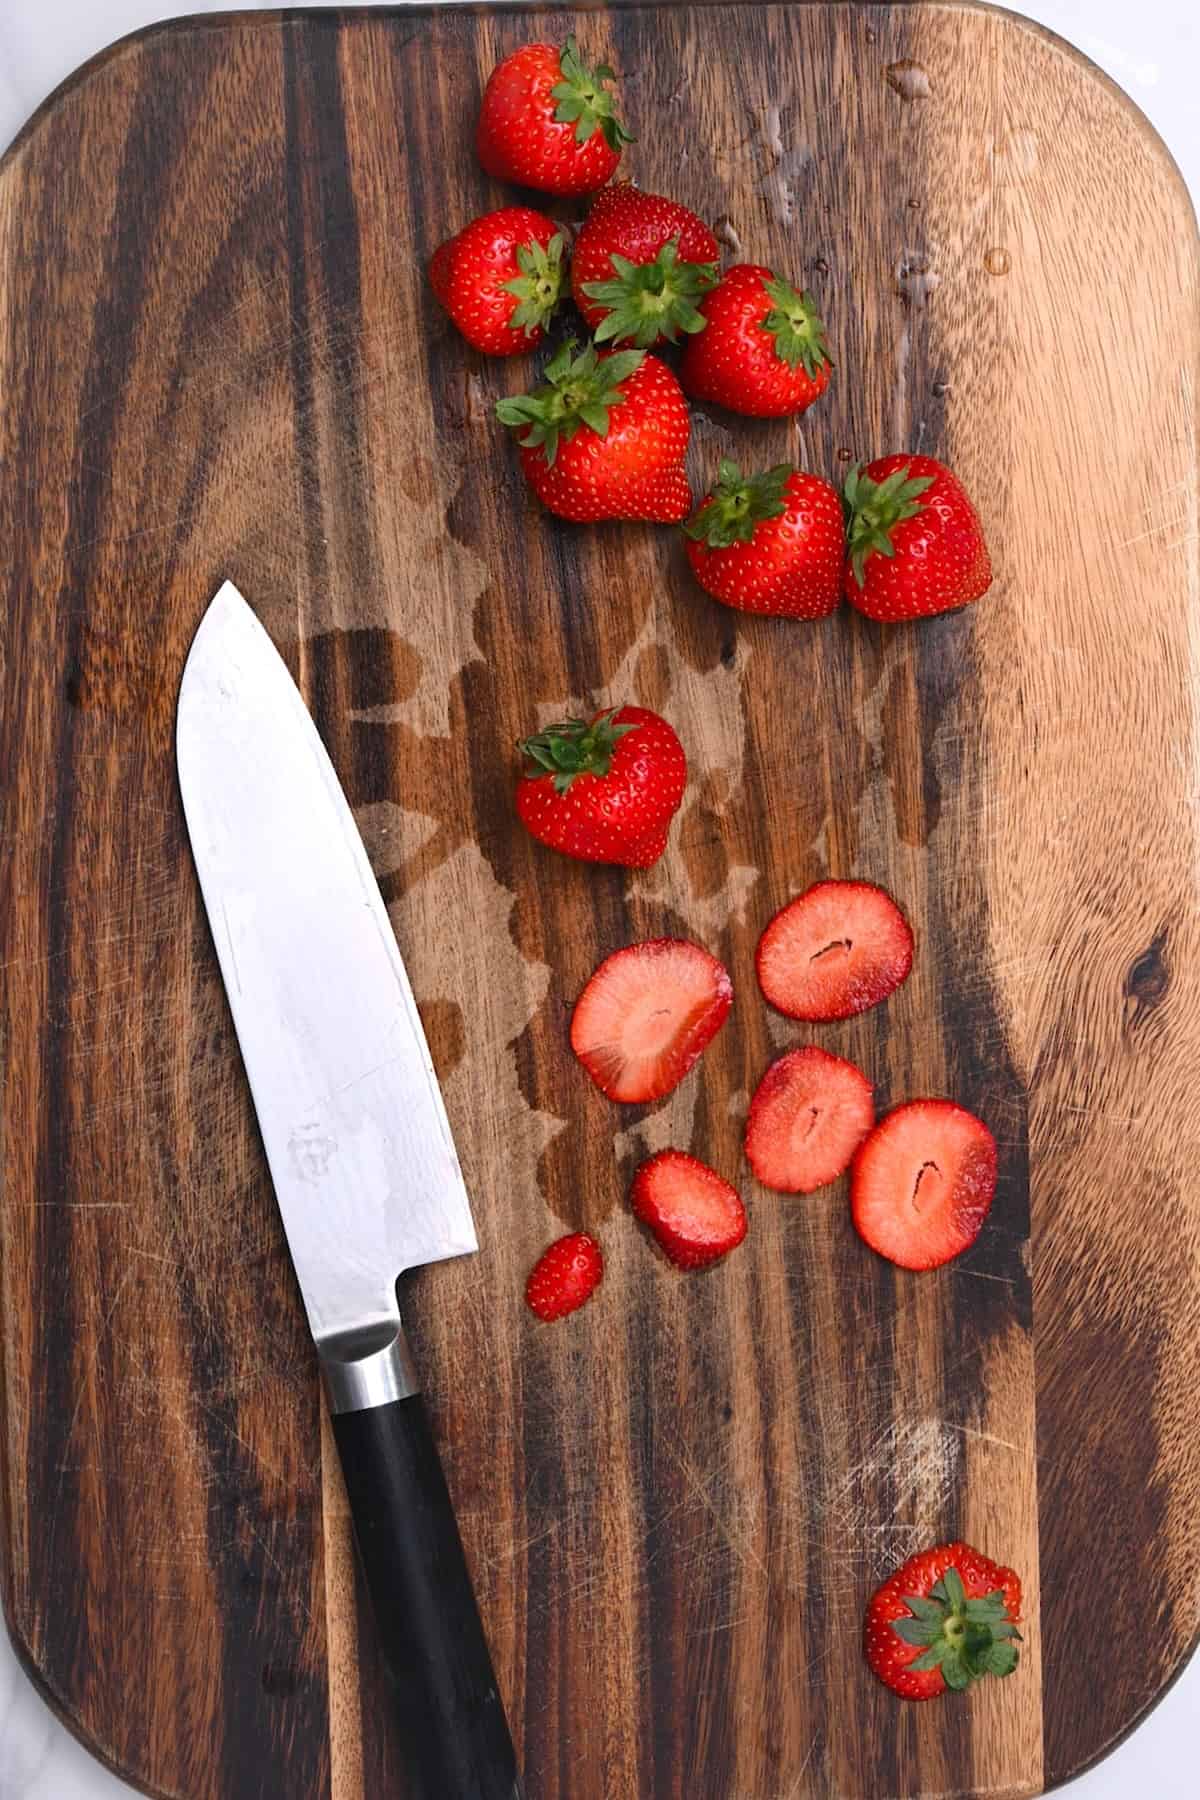 A knife and thinly sliced strawberries